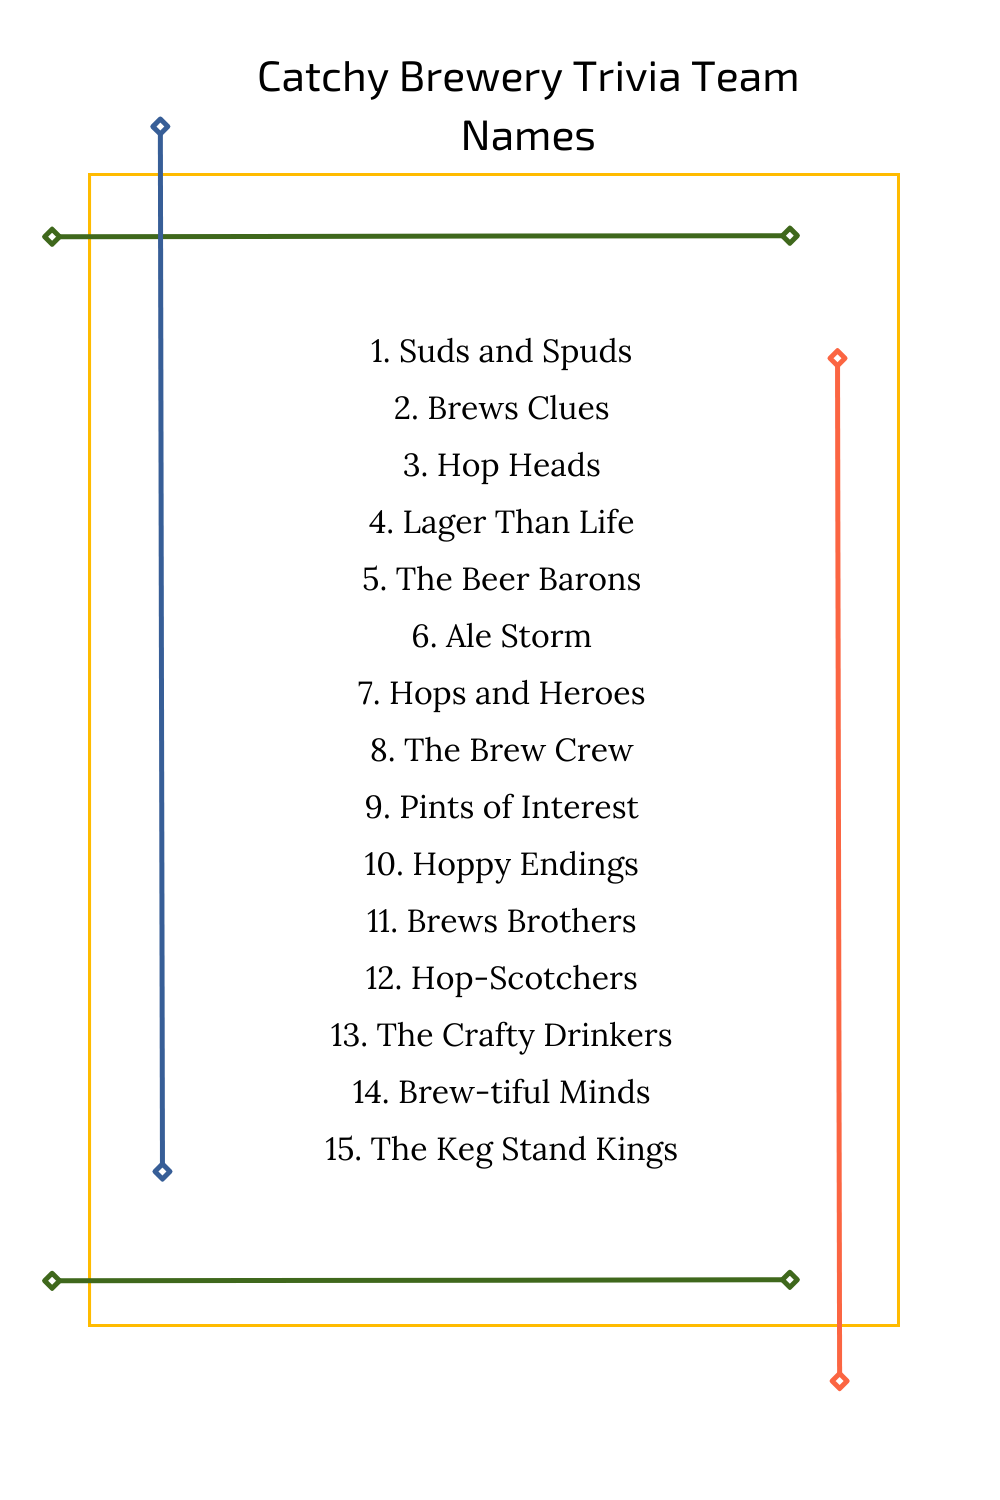 Catchy Brewery Trivia Team Names